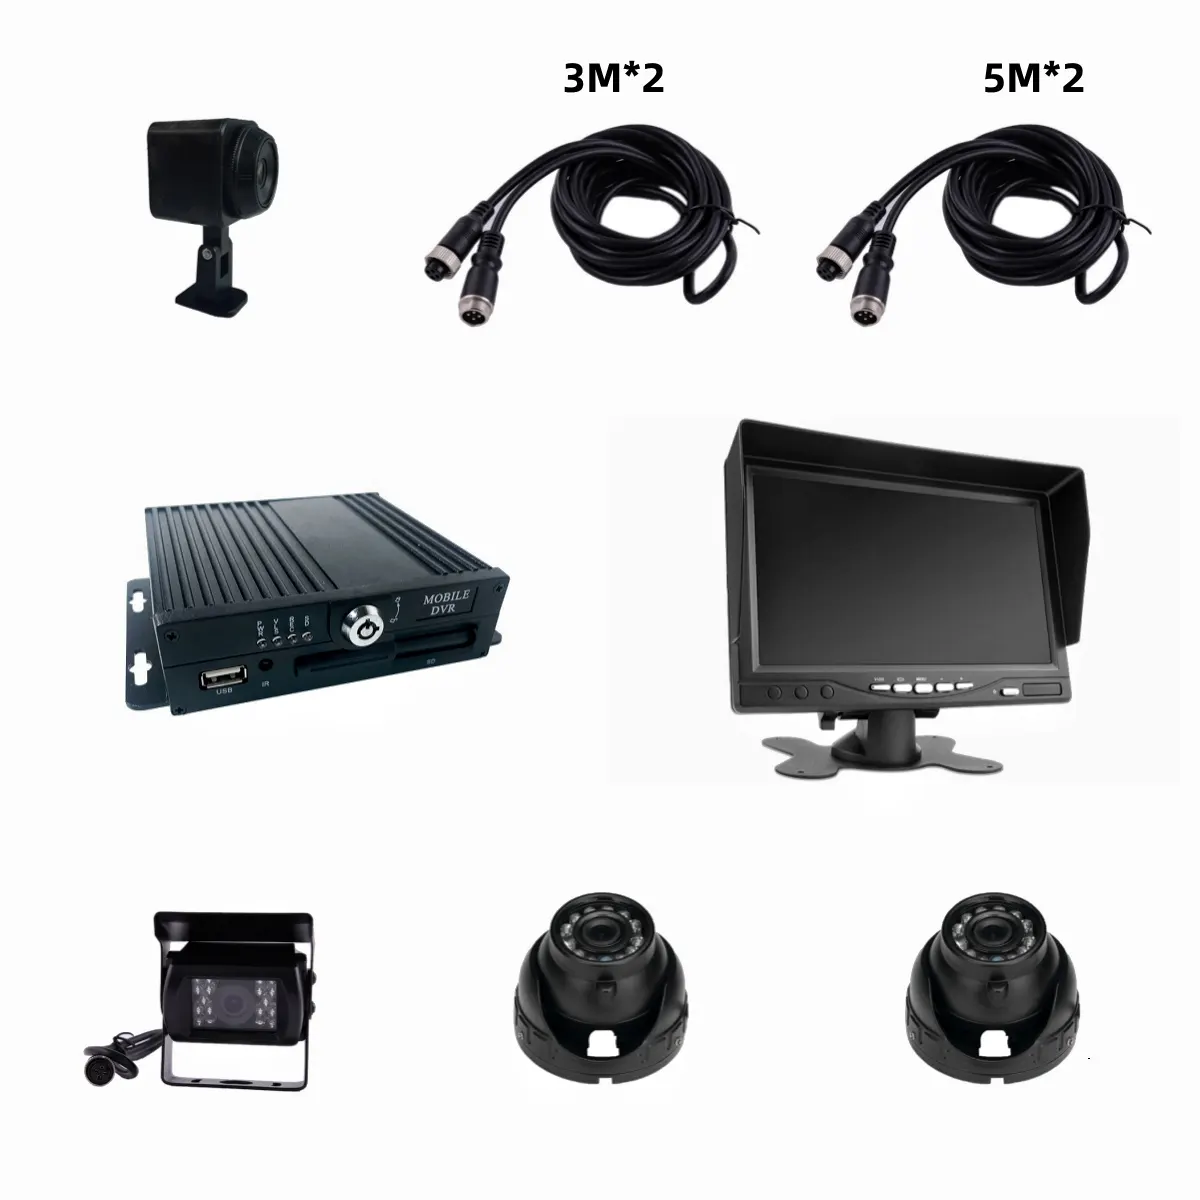 Hot Sale Bus/Taxi/Car/Truck 4 CH SD Card Vehicle MDVR Kit DVR Set with 4*AHD 1080P Camera and 1 LCD Monitor